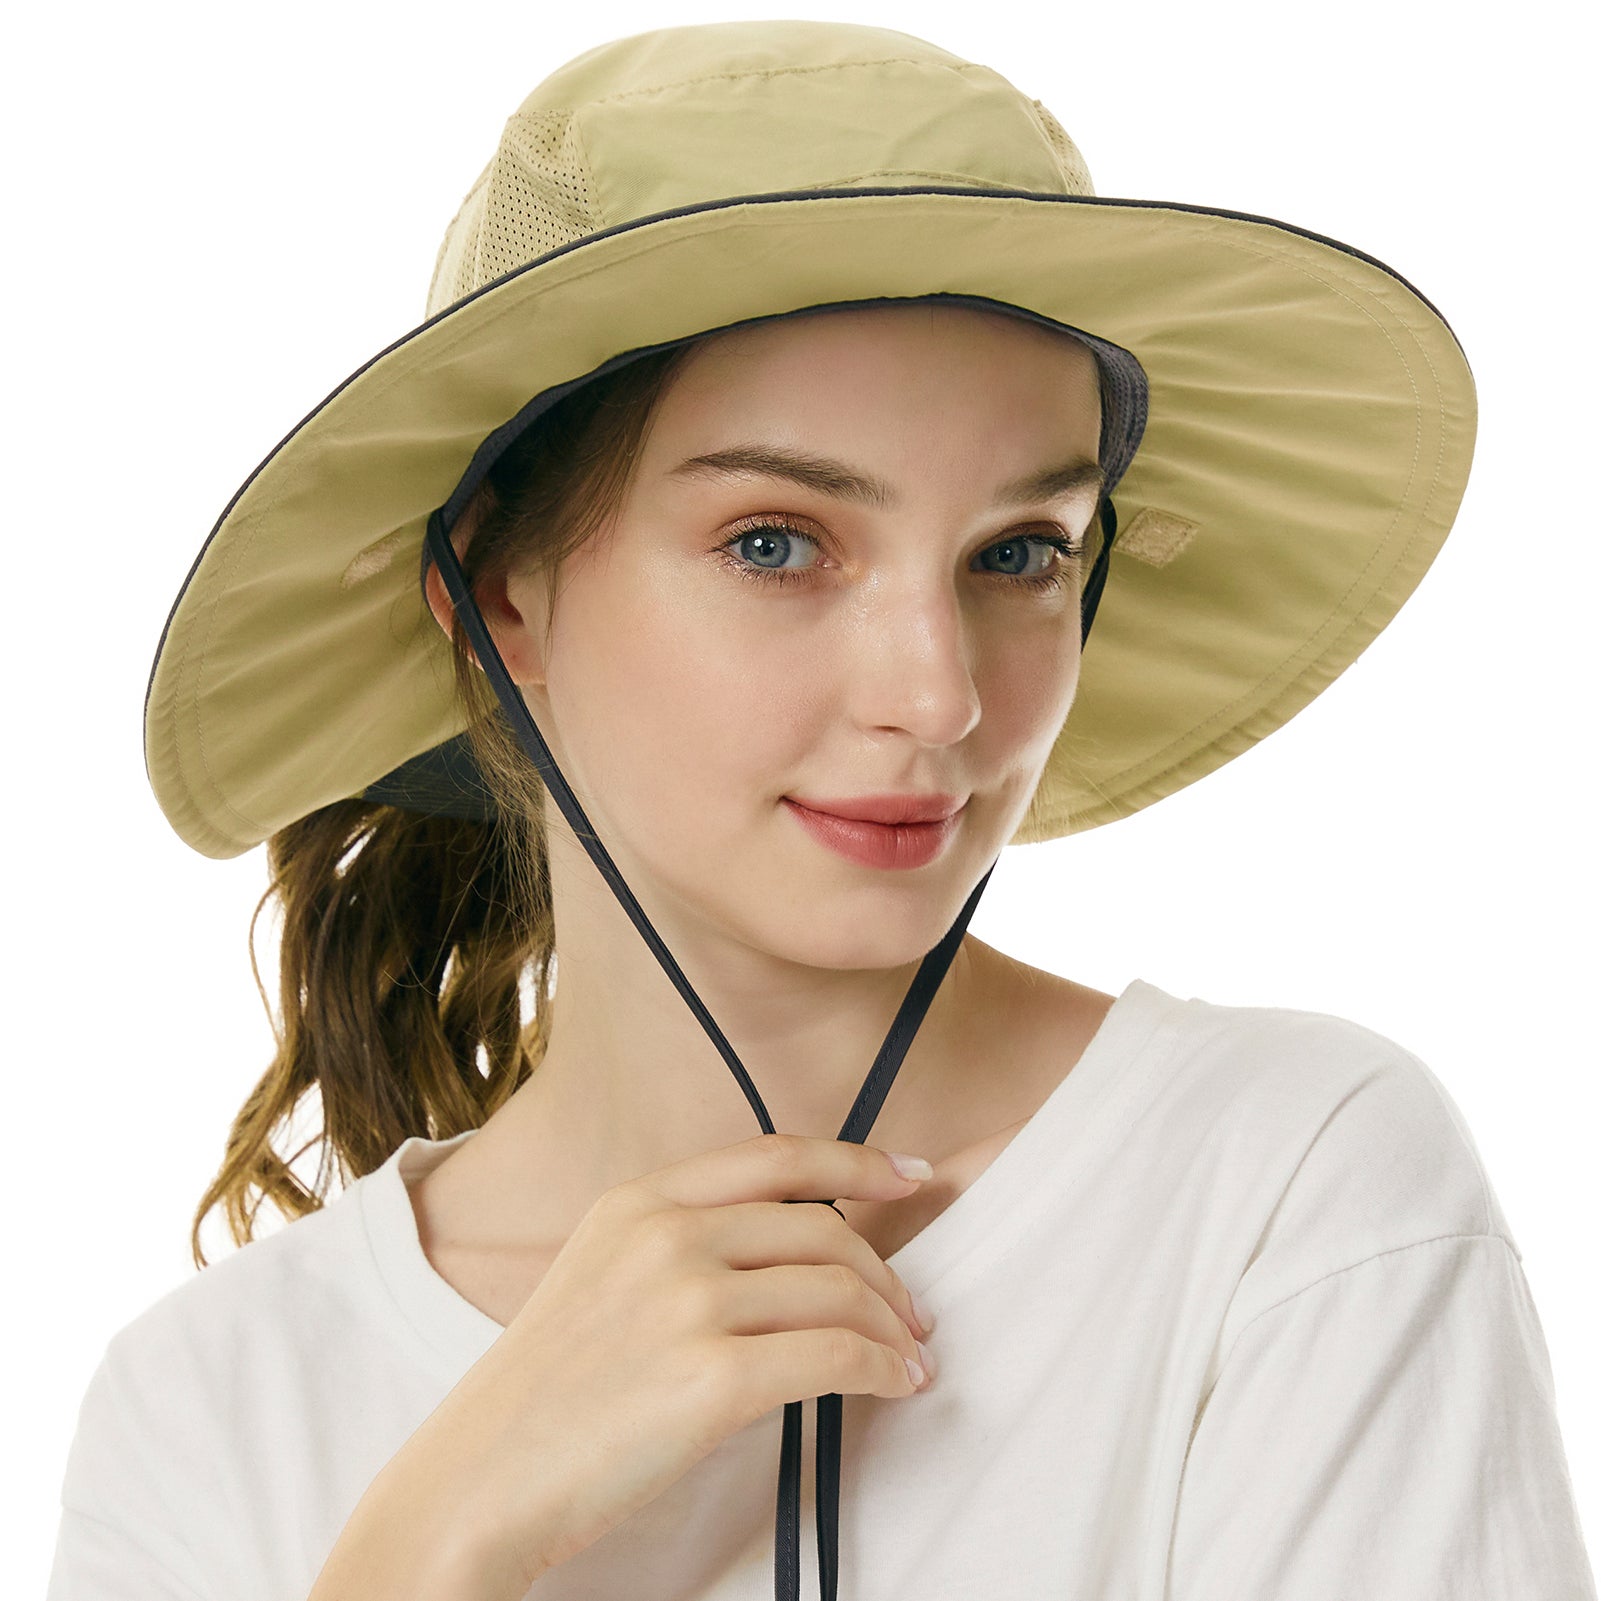 Bodychum Buckle Hat for Women Sun Hat Ponytail Cap Wide Brim UV Protection  Packable Summer Beach Hat Adjustable Floppy Hat for Fishing Hiking